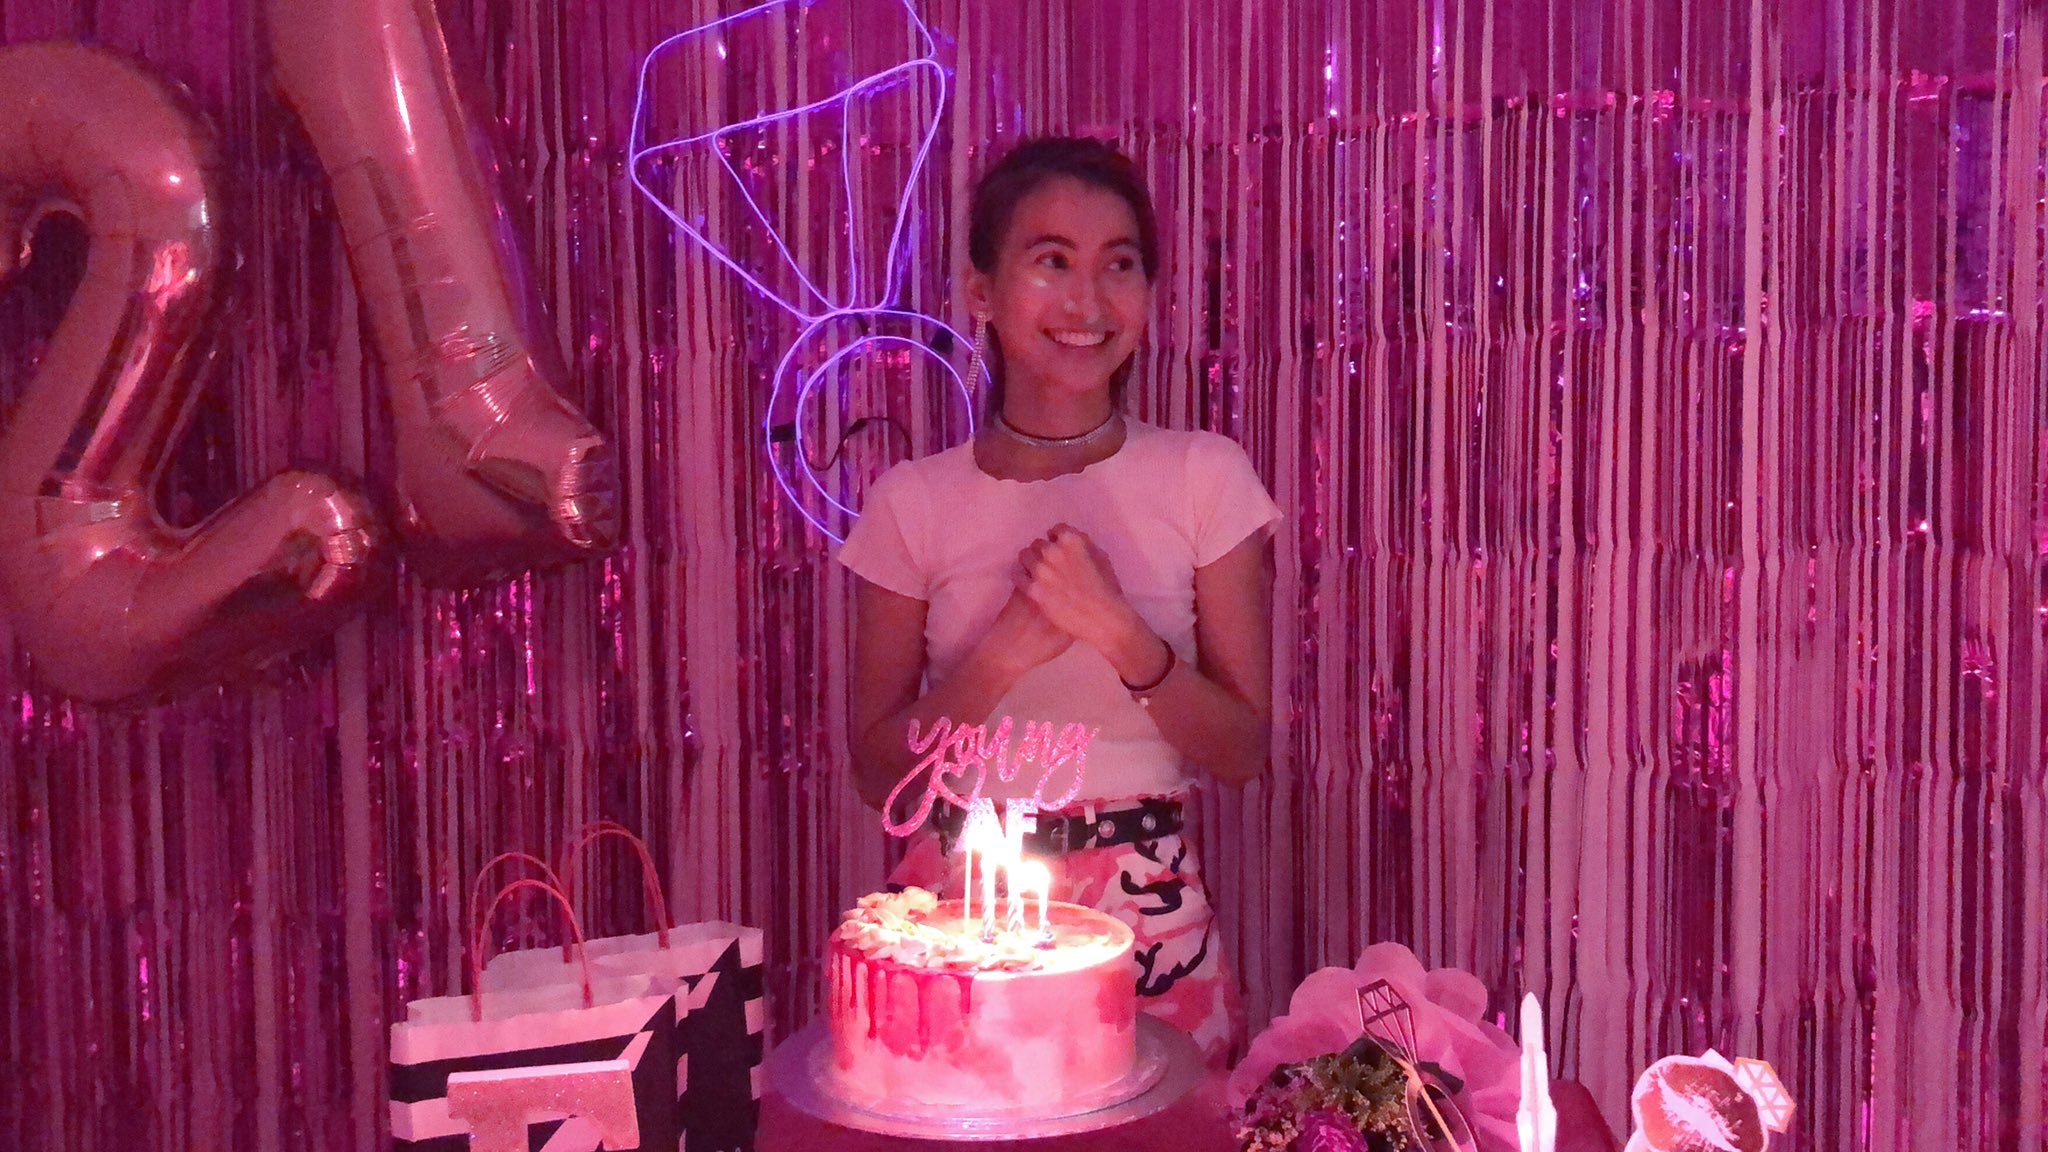 Falsedad gusano recompensa ❁butt's❁ on Twitter: "had the best 7 rings themed, 21st party ever and i'm  beyond blessed with great friends and family who's been with me throughout  💖💖💖 also, 12 year old me